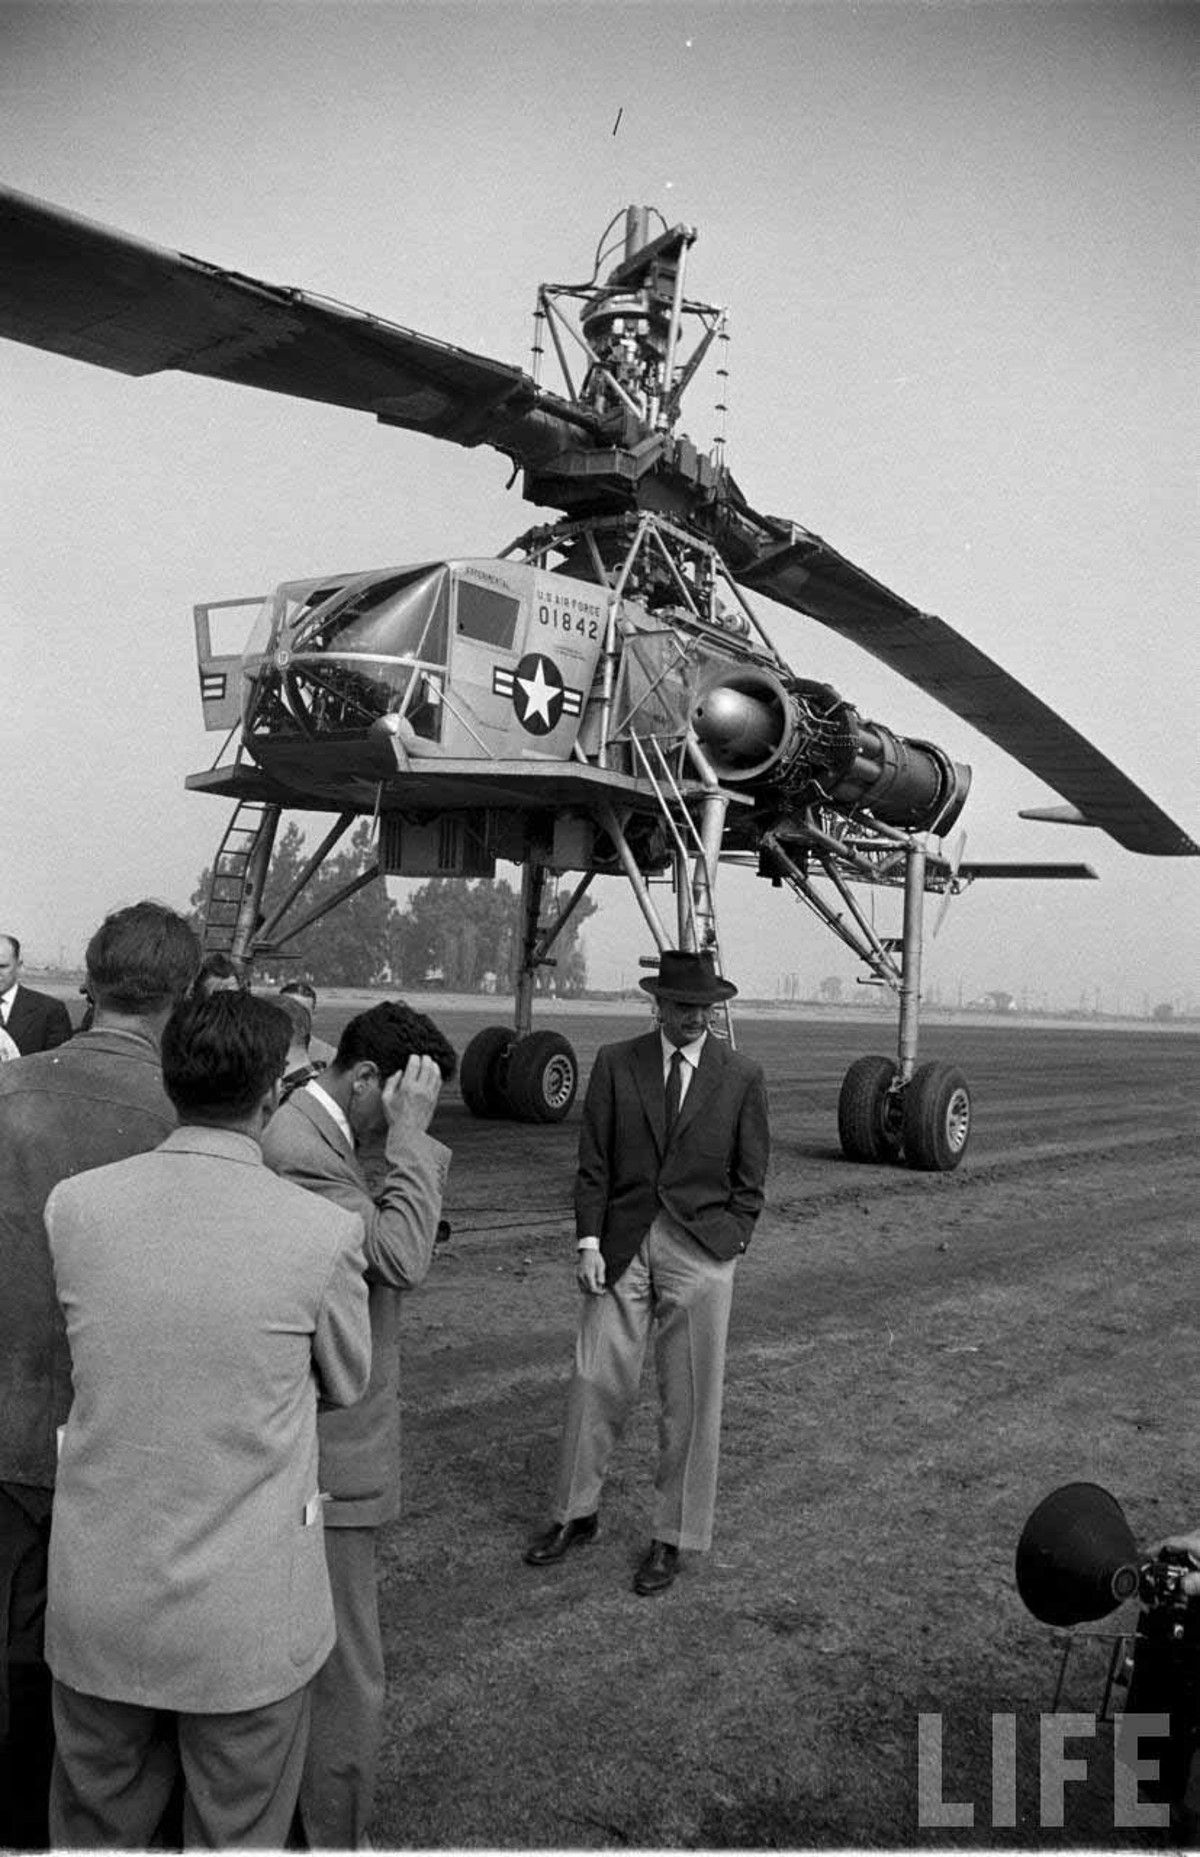 Hughes Aircraft’s Giant Helicopter, XH-17, 1953